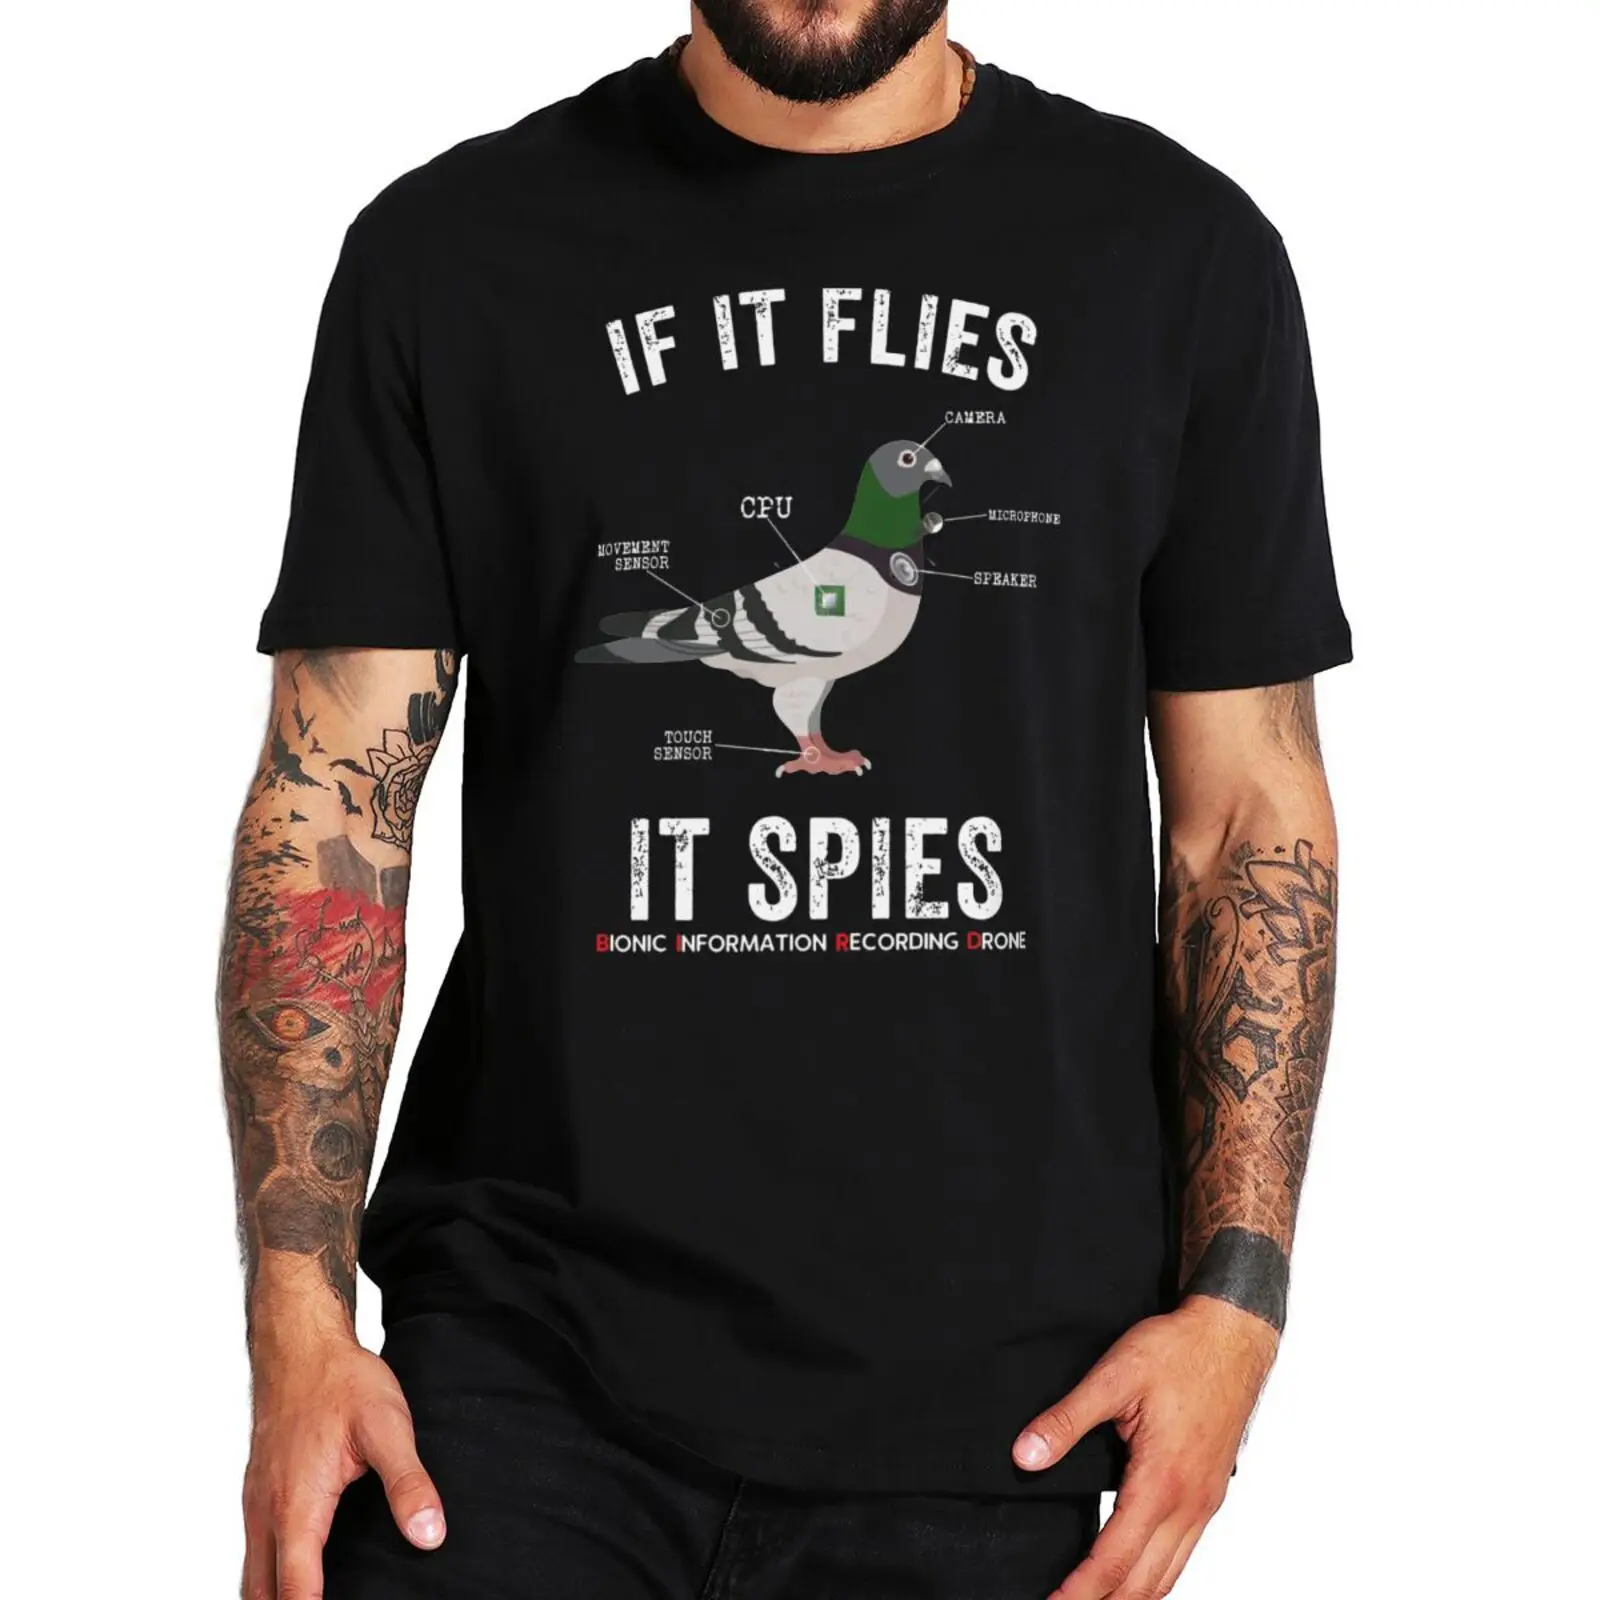 

If It Flies It Spies Birds Are Not Real T Shirt Funny Nerd Drone Conspiracy Theory Classic Tshirts 100% Cotton For Unisex